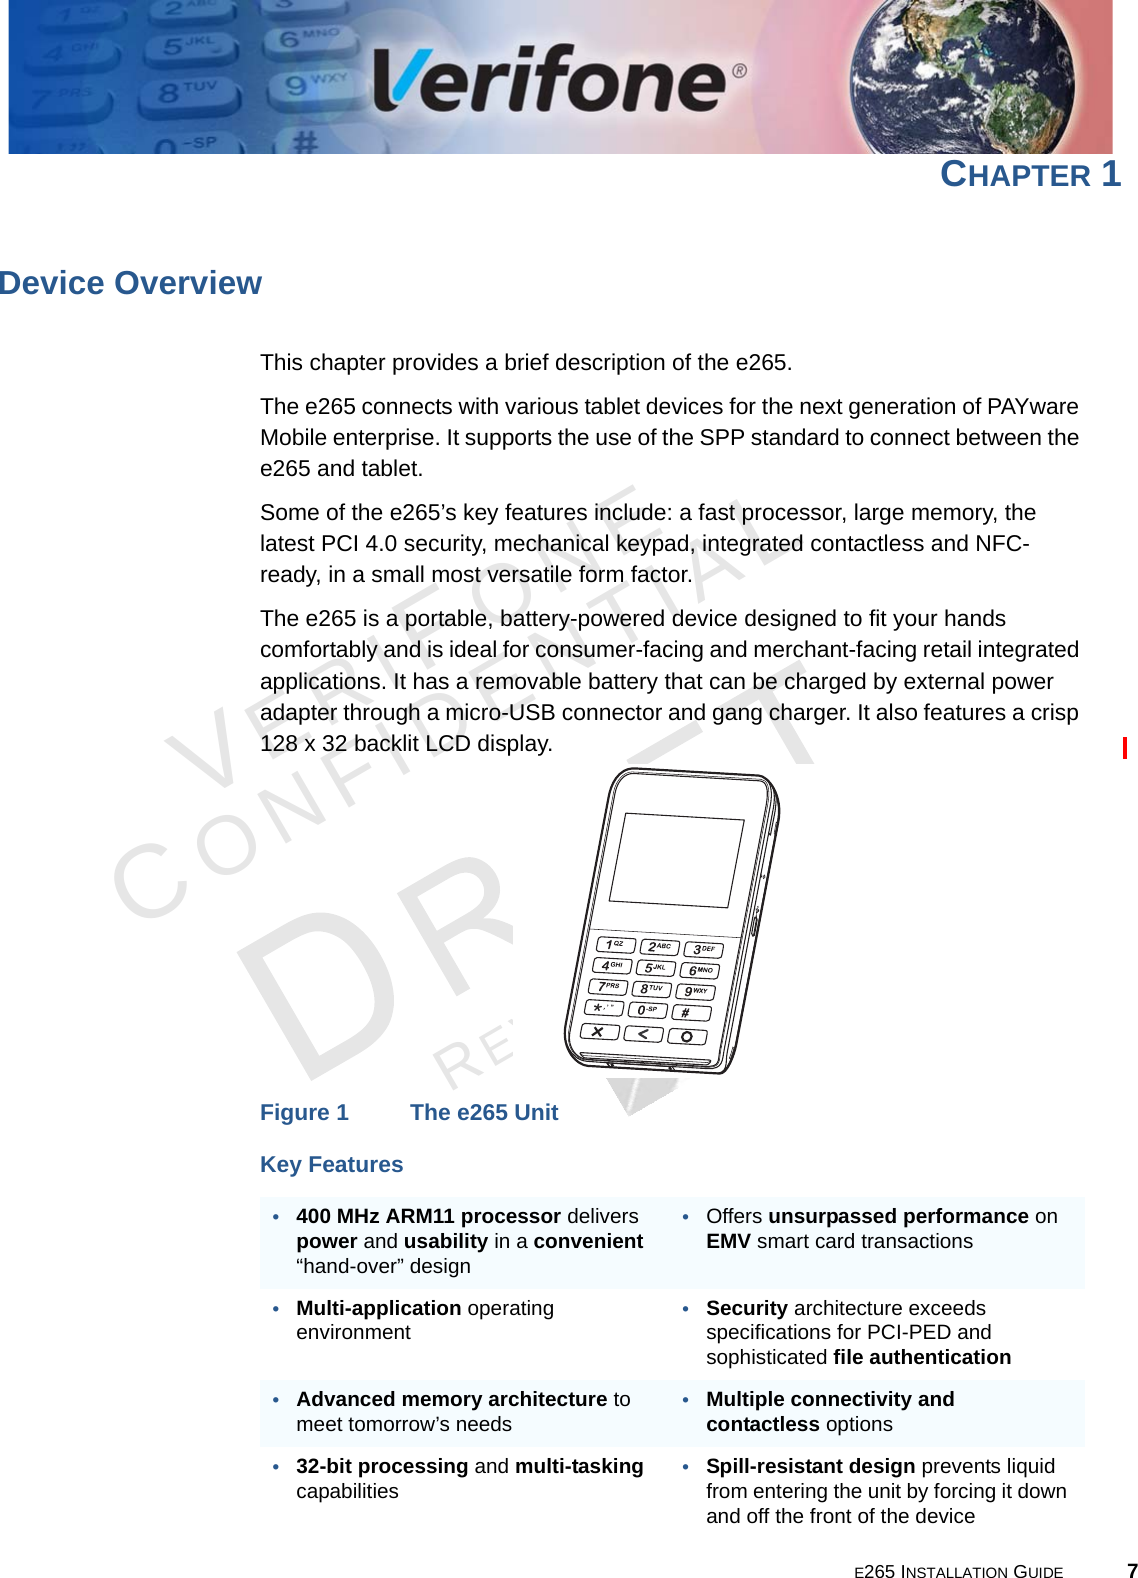 E265 INSTALLATION GUIDE 7VERIFONECONFIDENTIALREVISION A.6 CHAPTER 1Device OverviewThis chapter provides a brief description of the e265.The e265 connects with various tablet devices for the next generation of PAYware Mobile enterprise. It supports the use of the SPP standard to connect between the e265 and tablet.Some of the e265’s key features include: a fast processor, large memory, the latest PCI 4.0 security, mechanical keypad, integrated contactless and NFC-ready, in a small most versatile form factor.The e265 is a portable, battery-powered device designed to fit your hands comfortably and is ideal for consumer-facing and merchant-facing retail integrated applications. It has a removable battery that can be charged by external power adapter through a micro-USB connector and gang charger. It also features a crisp 128 x 32 backlit LCD display.Figure 1 The e265 UnitKey Features•400 MHz ARM11 processor delivers power and usability in a convenient “hand-over” design•Offers unsurpassed performance on EMV smart card transactions•Multi-application operating environment•Security architecture exceeds specifications for PCI-PED and sophisticated file authentication•Advanced memory architecture to meet tomorrow’s needs•Multiple connectivity and contactless options•32-bit processing and multi-tasking capabilities•Spill-resistant design prevents liquid from entering the unit by forcing it down and off the front of the device